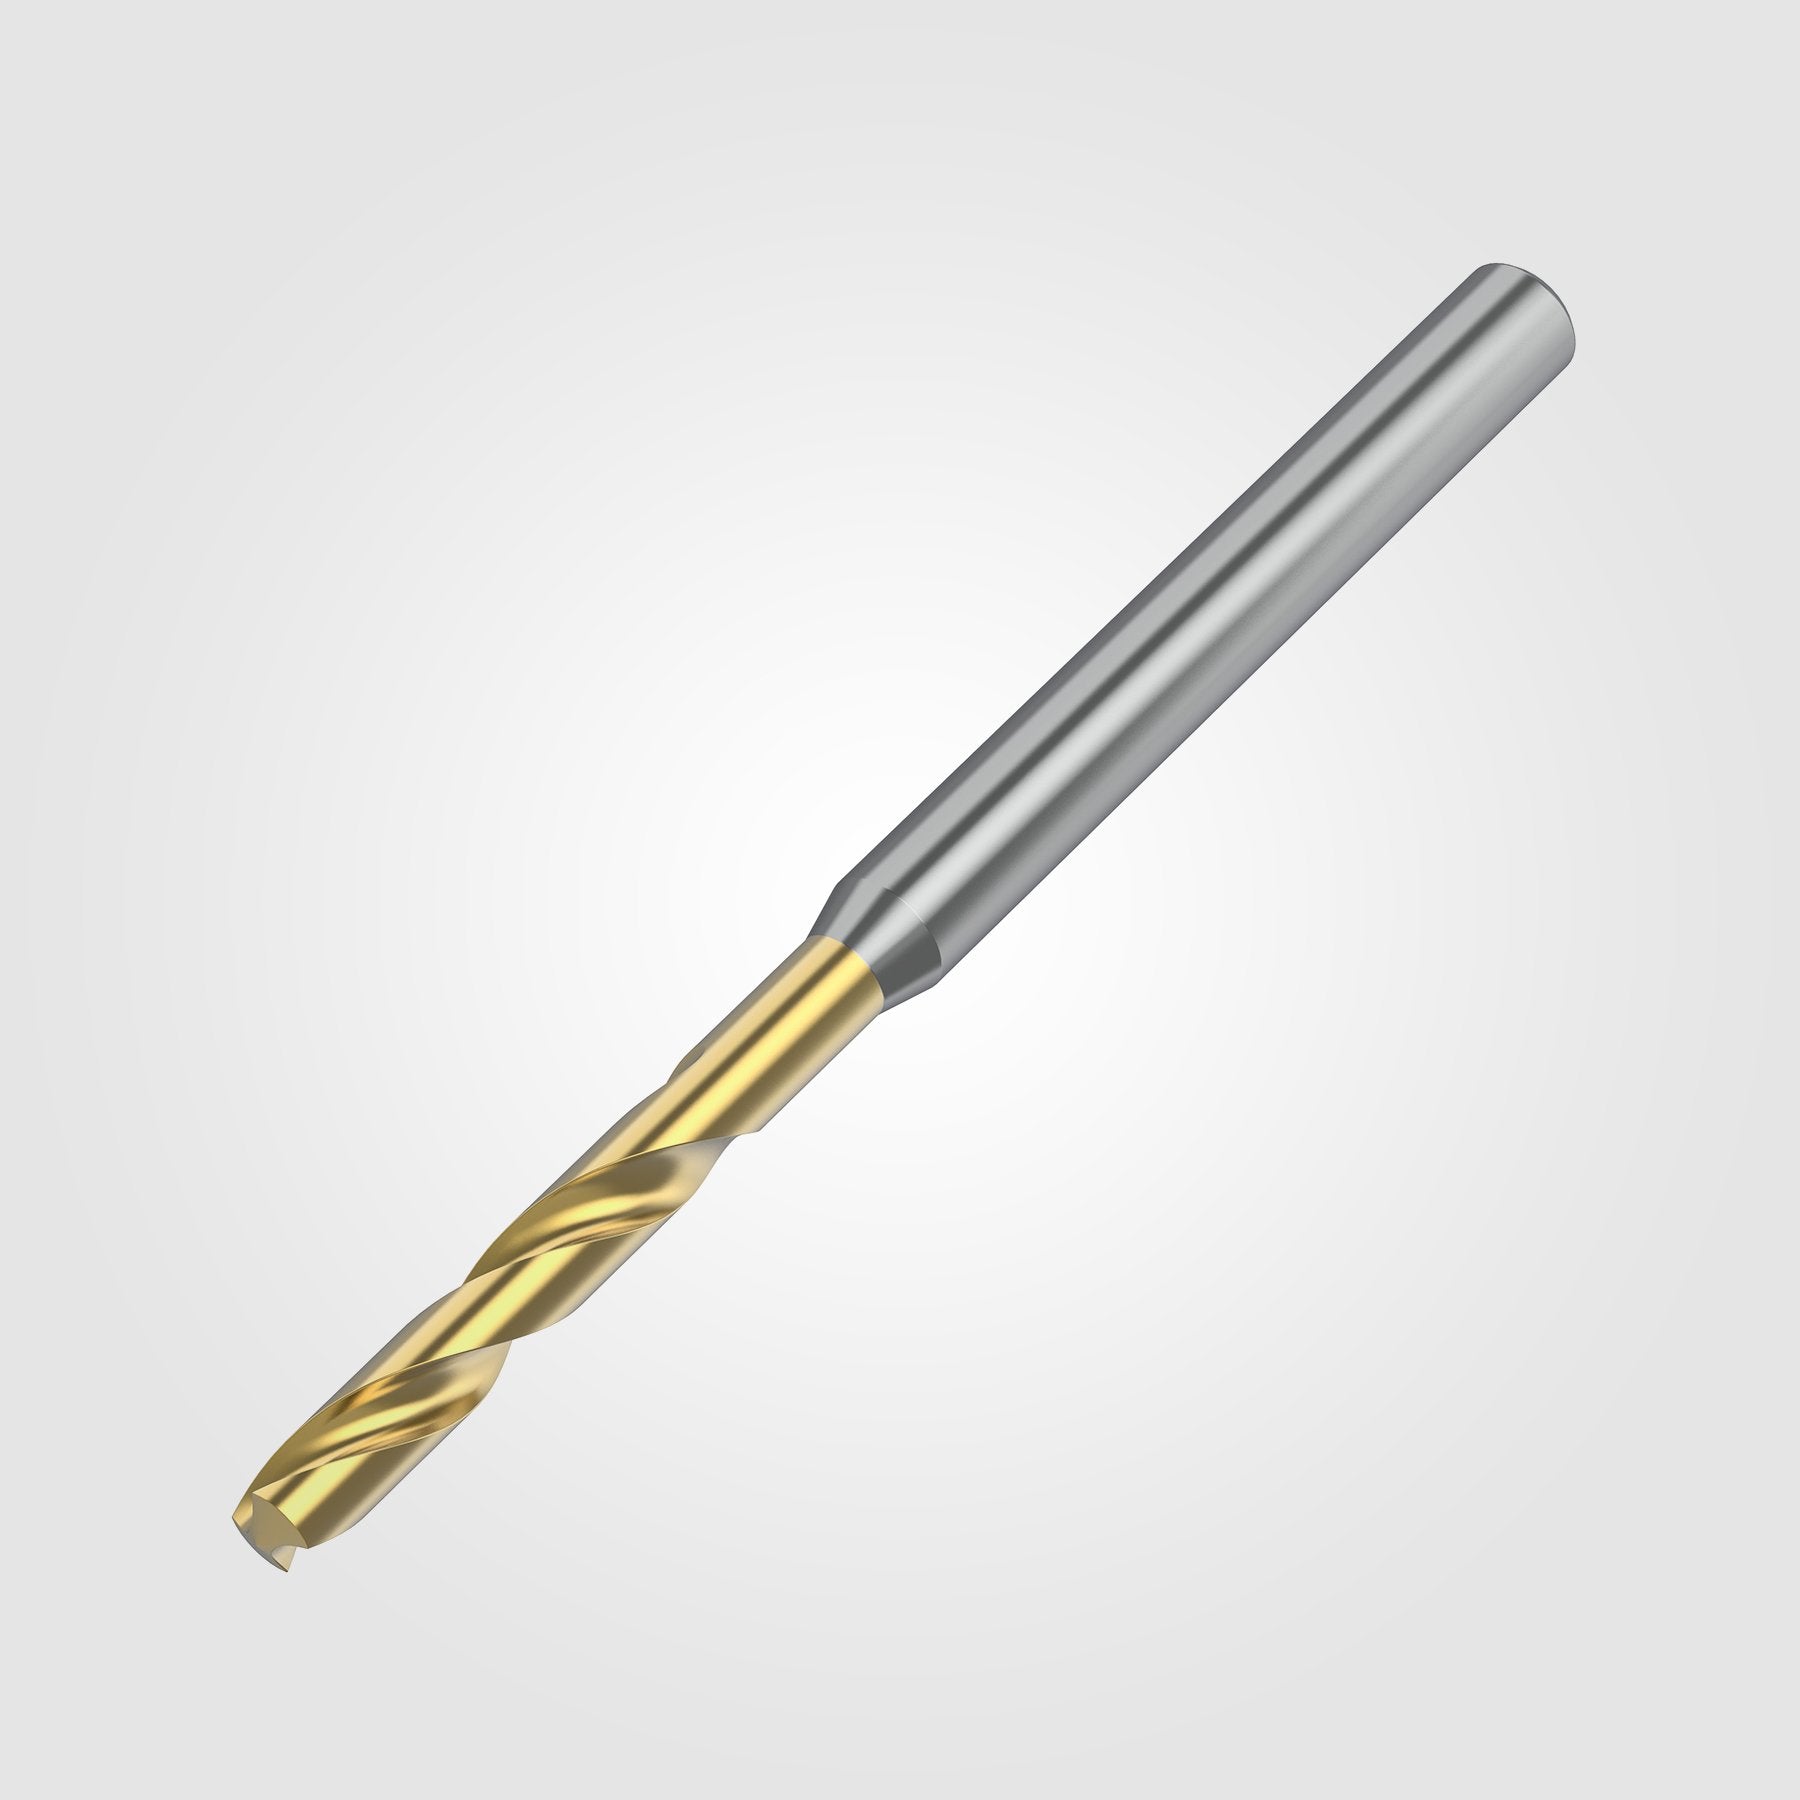 GOdrill (THROUGH COOLANT) | 3.6mm / .1417" / 5xD | SOLID CARBIDE DRILL | 4149186